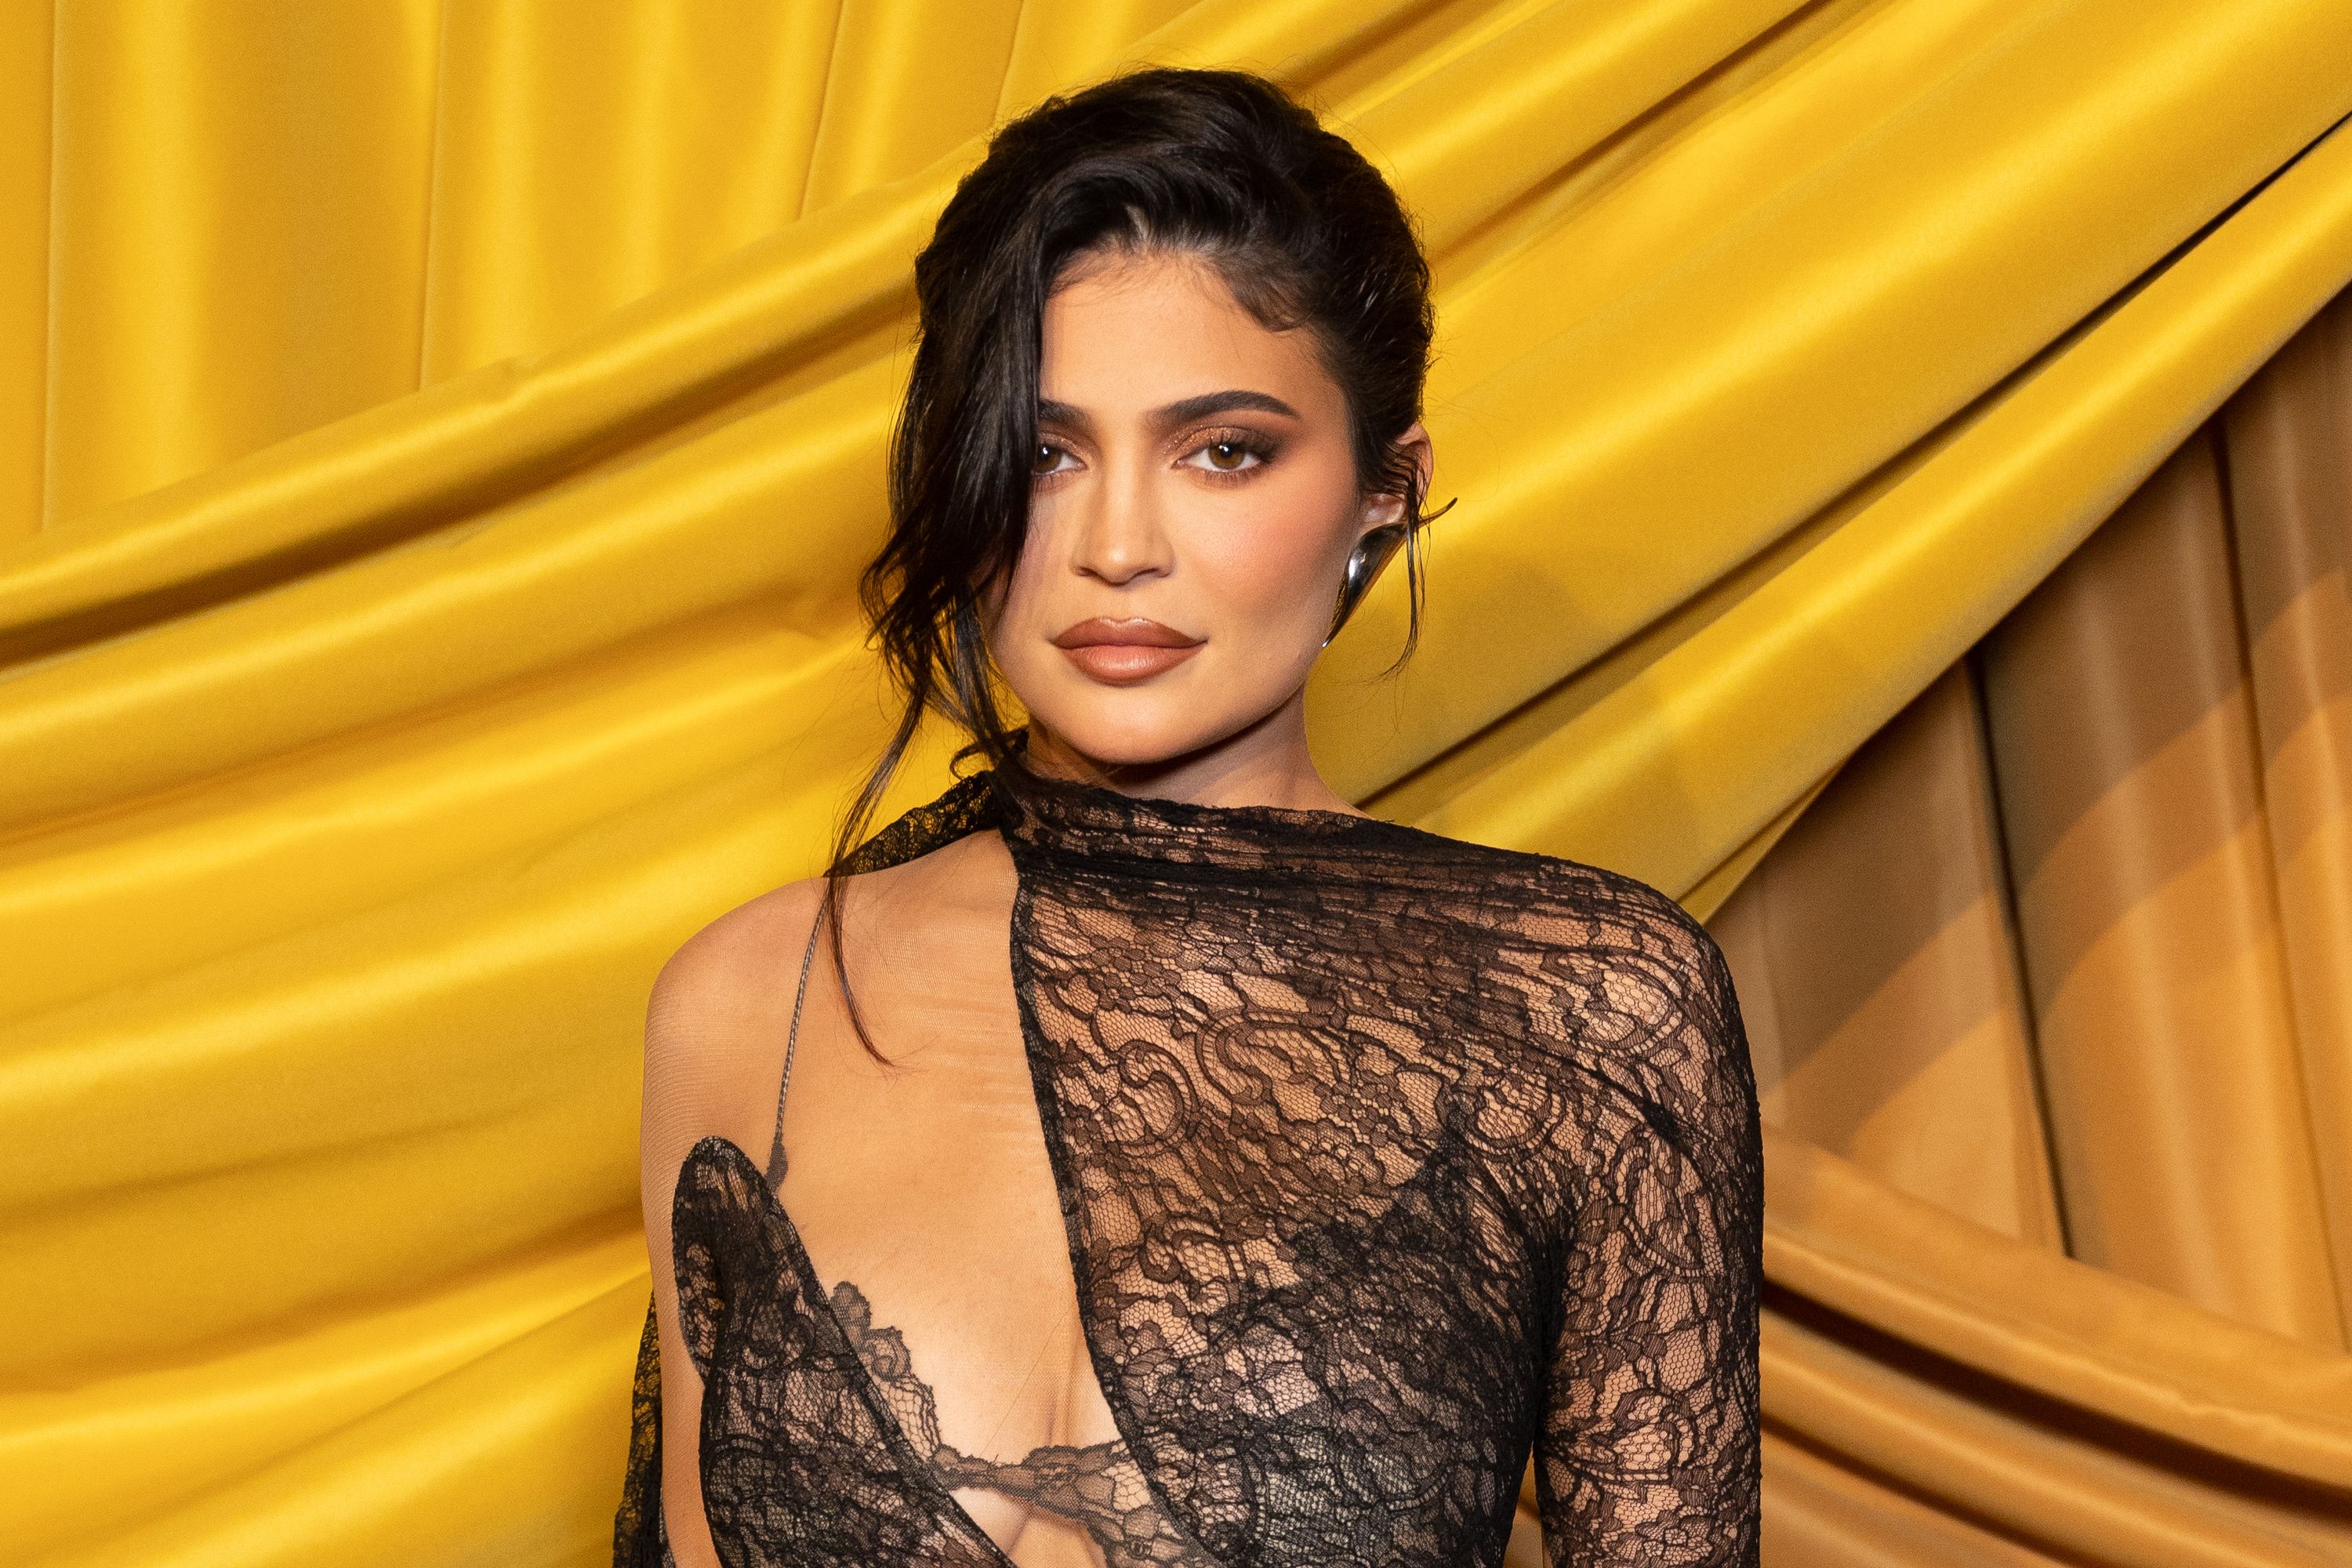 Kylie Jenner gives us a tour of her wardrobe on her website